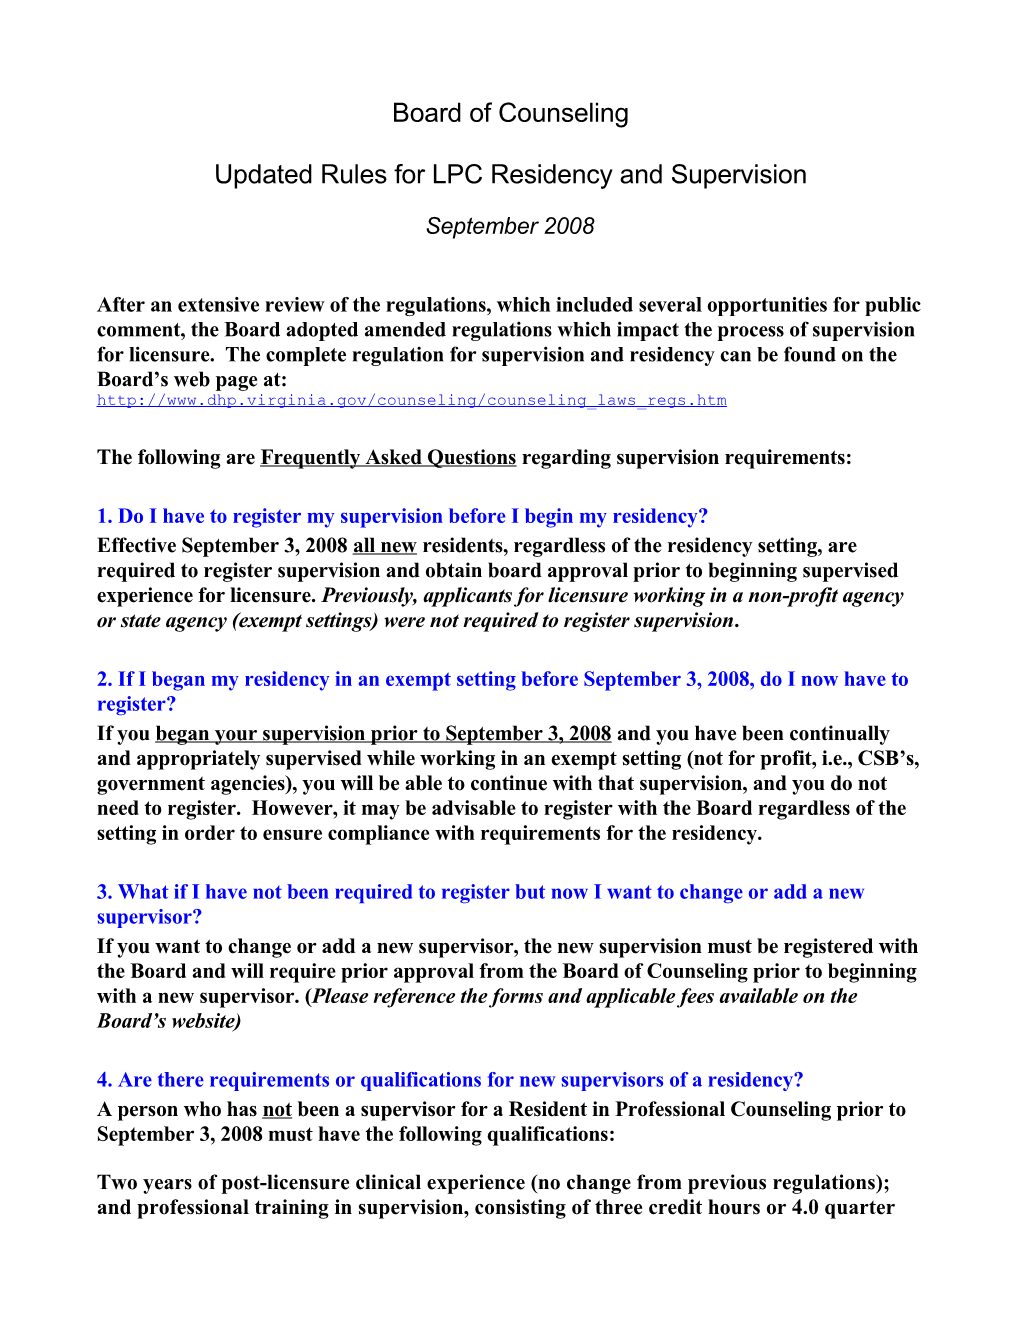 Board of Counseling - Questions and Answers for LPC Residency and Supervision